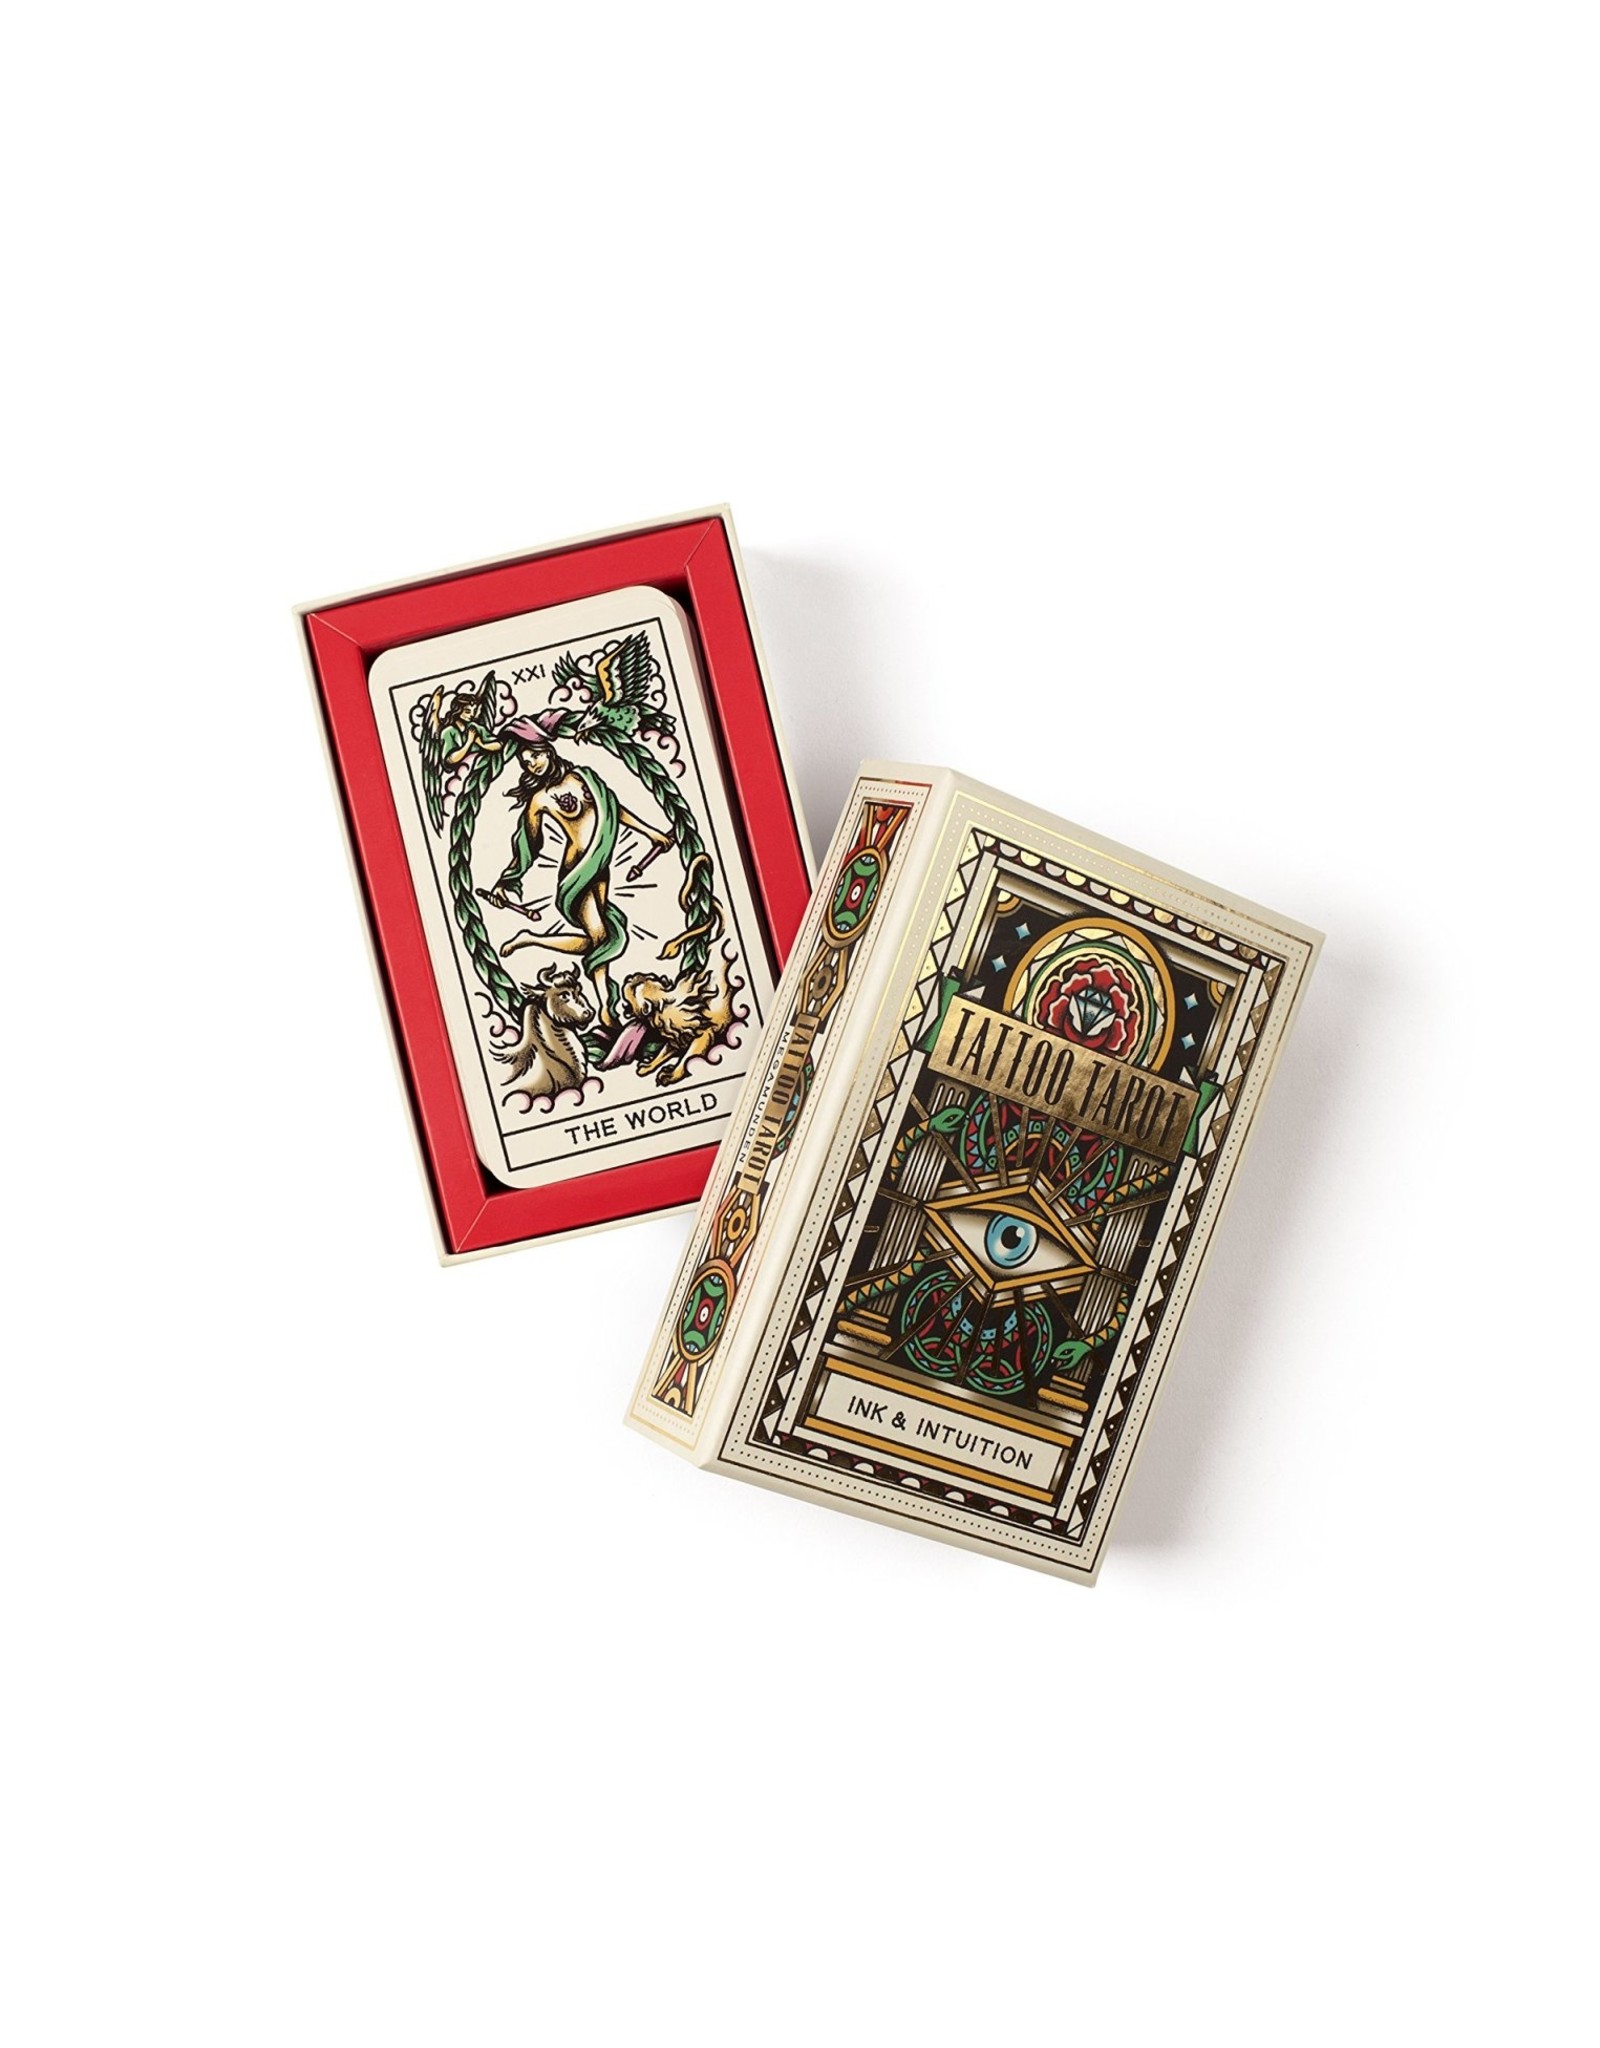 Chronicle Books Tattoo Tarot: Ink & Intuition